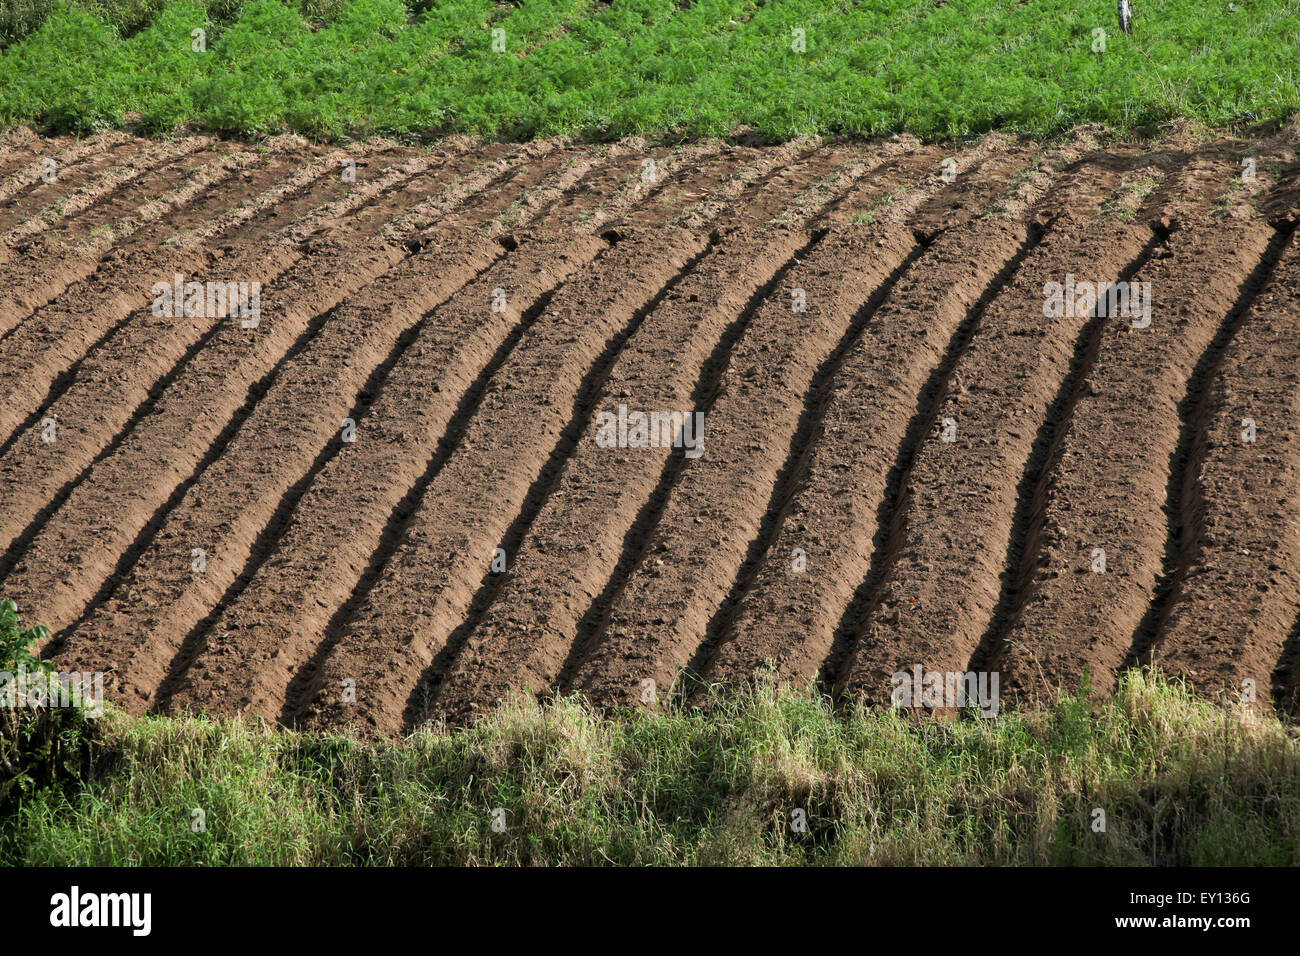 Patterns of an agricultural farmland in Tomohon, North Sulawesi, Indonesia. Stock Photo